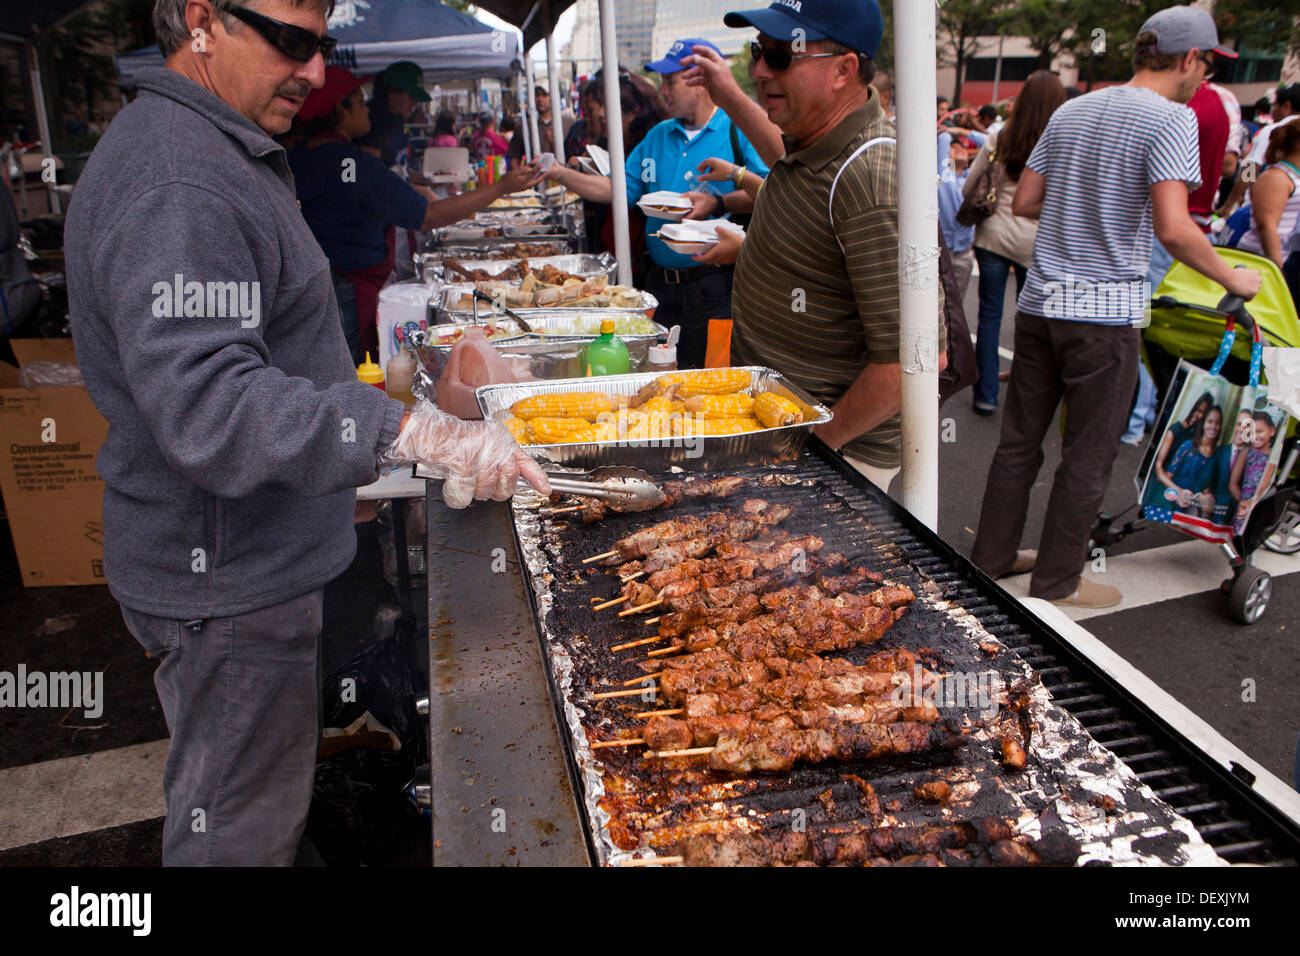 Man grilling chicken skewers on barbecue grill at outdoor festival - USA Stock Photo